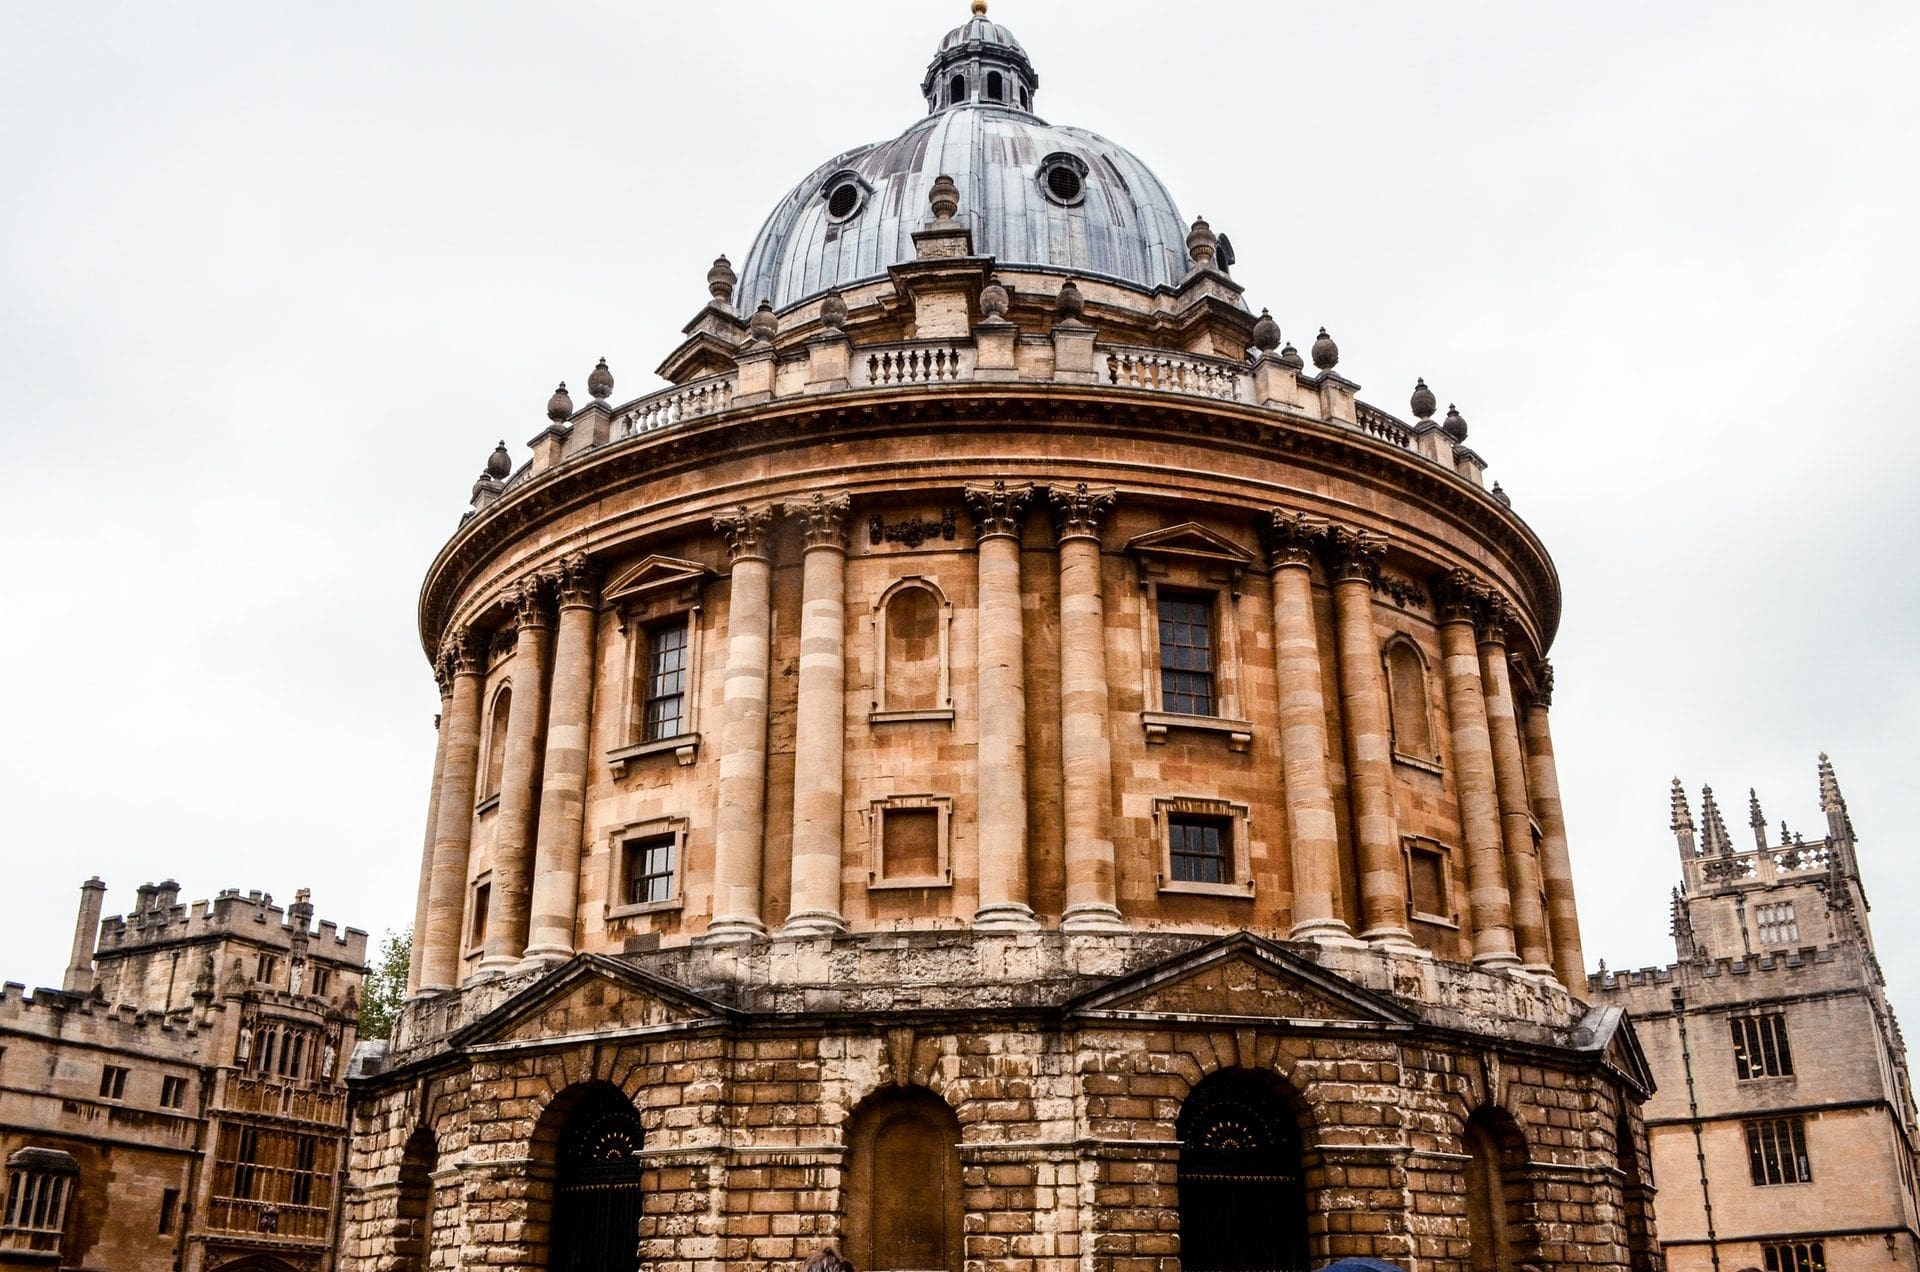 radcliffe-camera-old-historic-building-domed-library-and-tourist-attraction-oxford-university